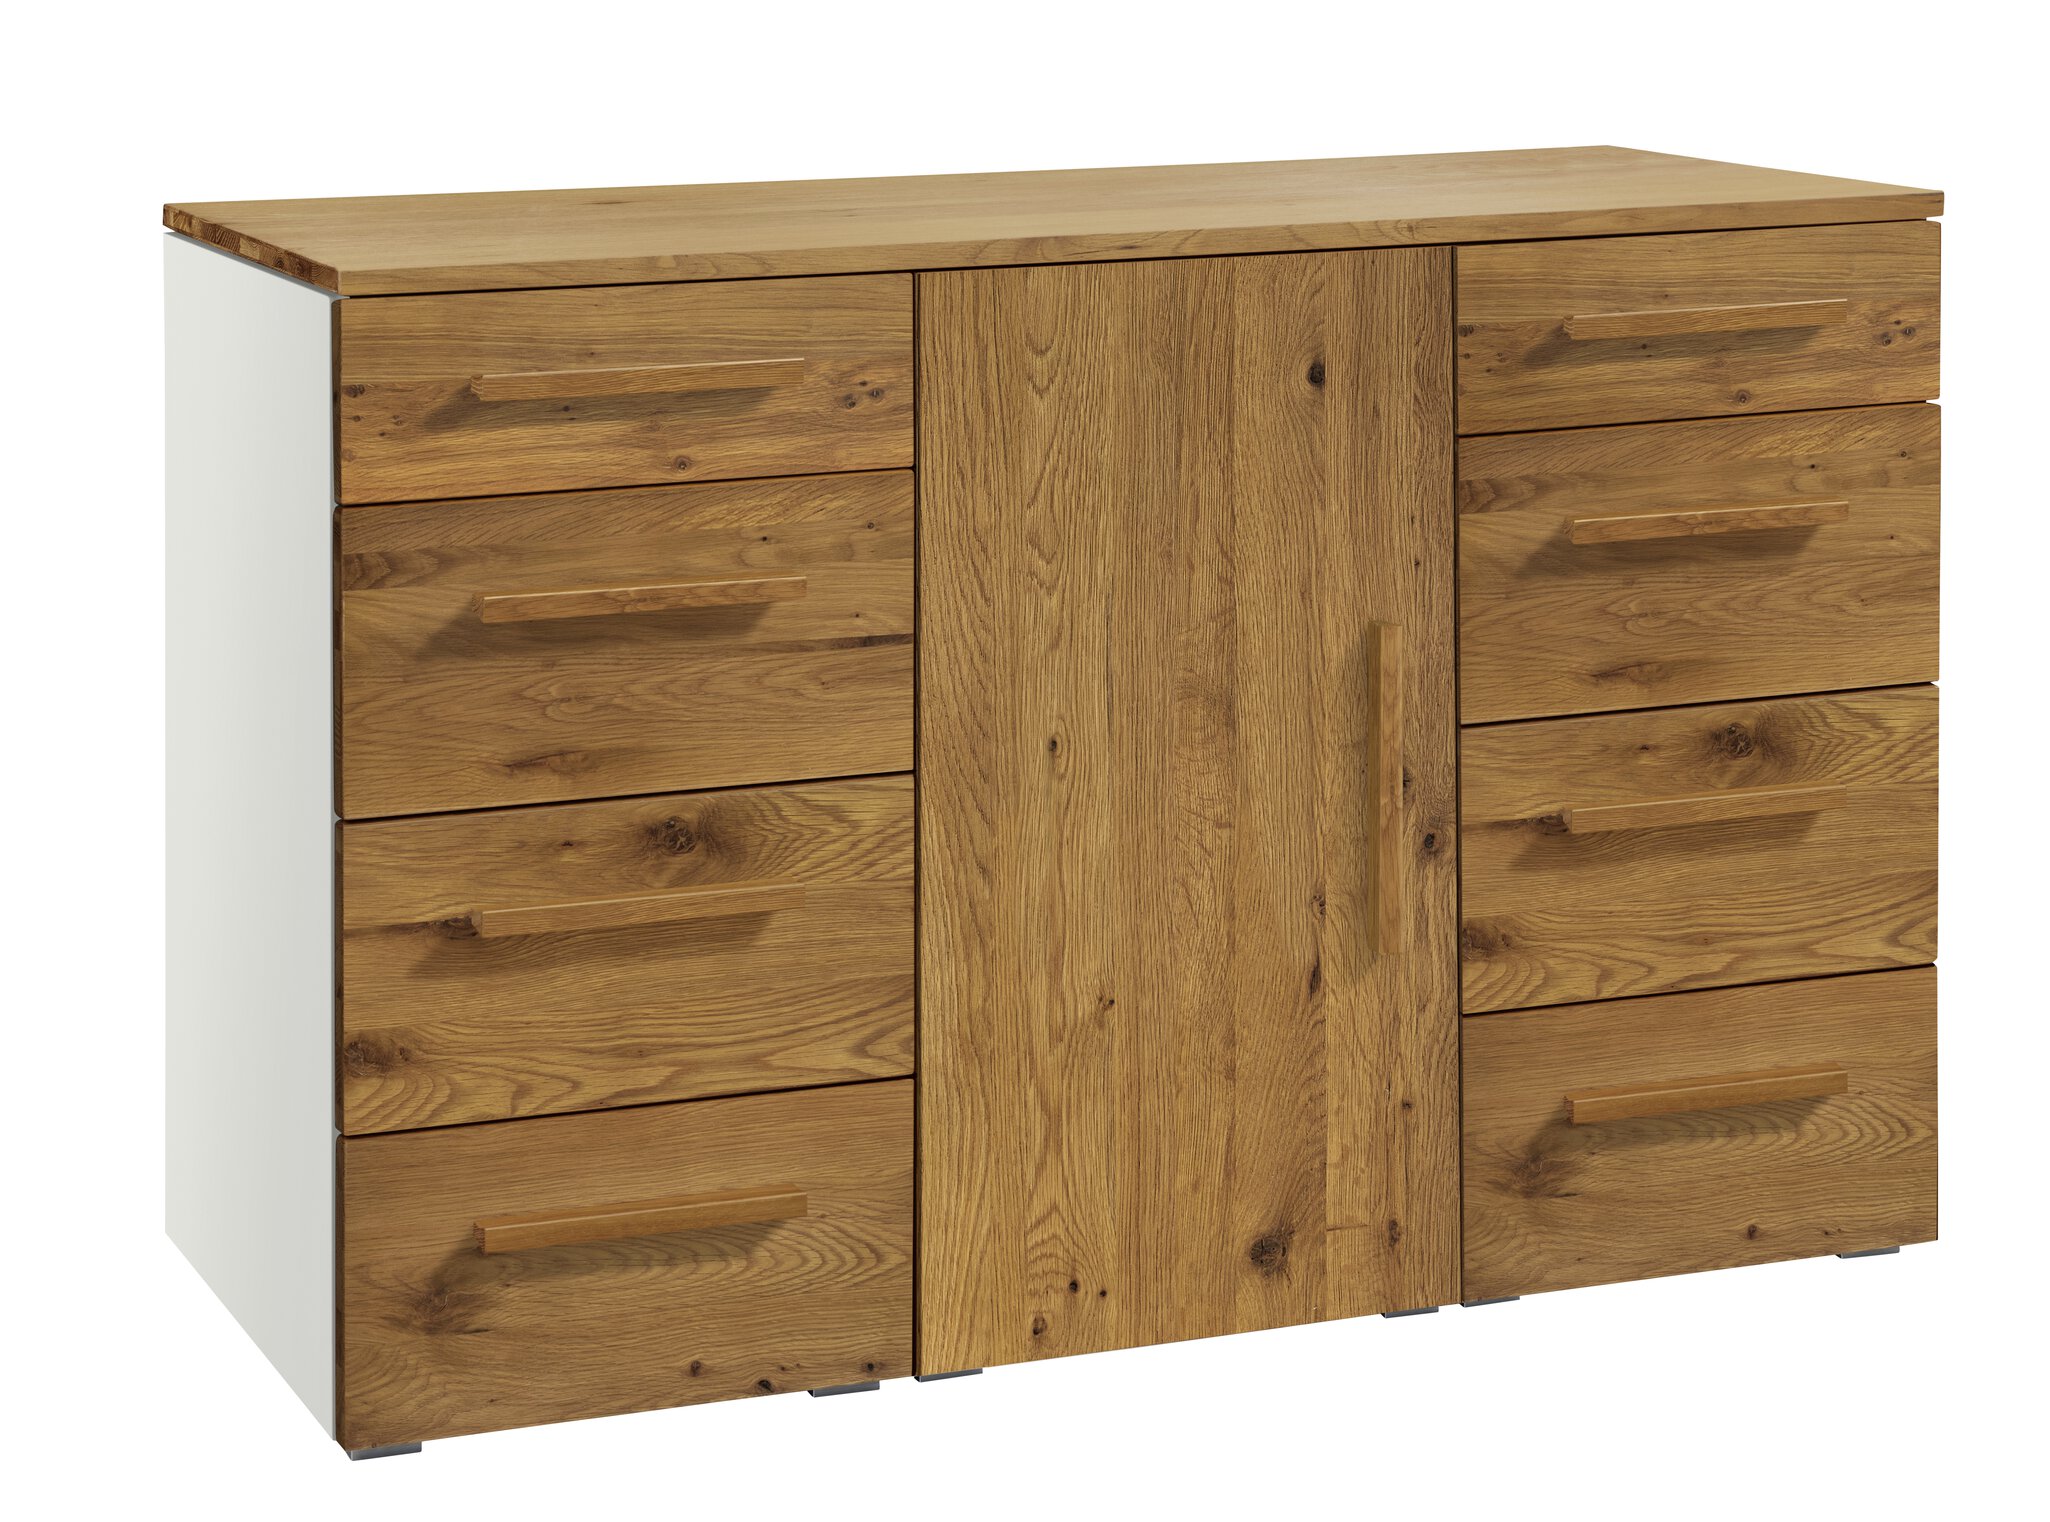 Incentro chest of drawers